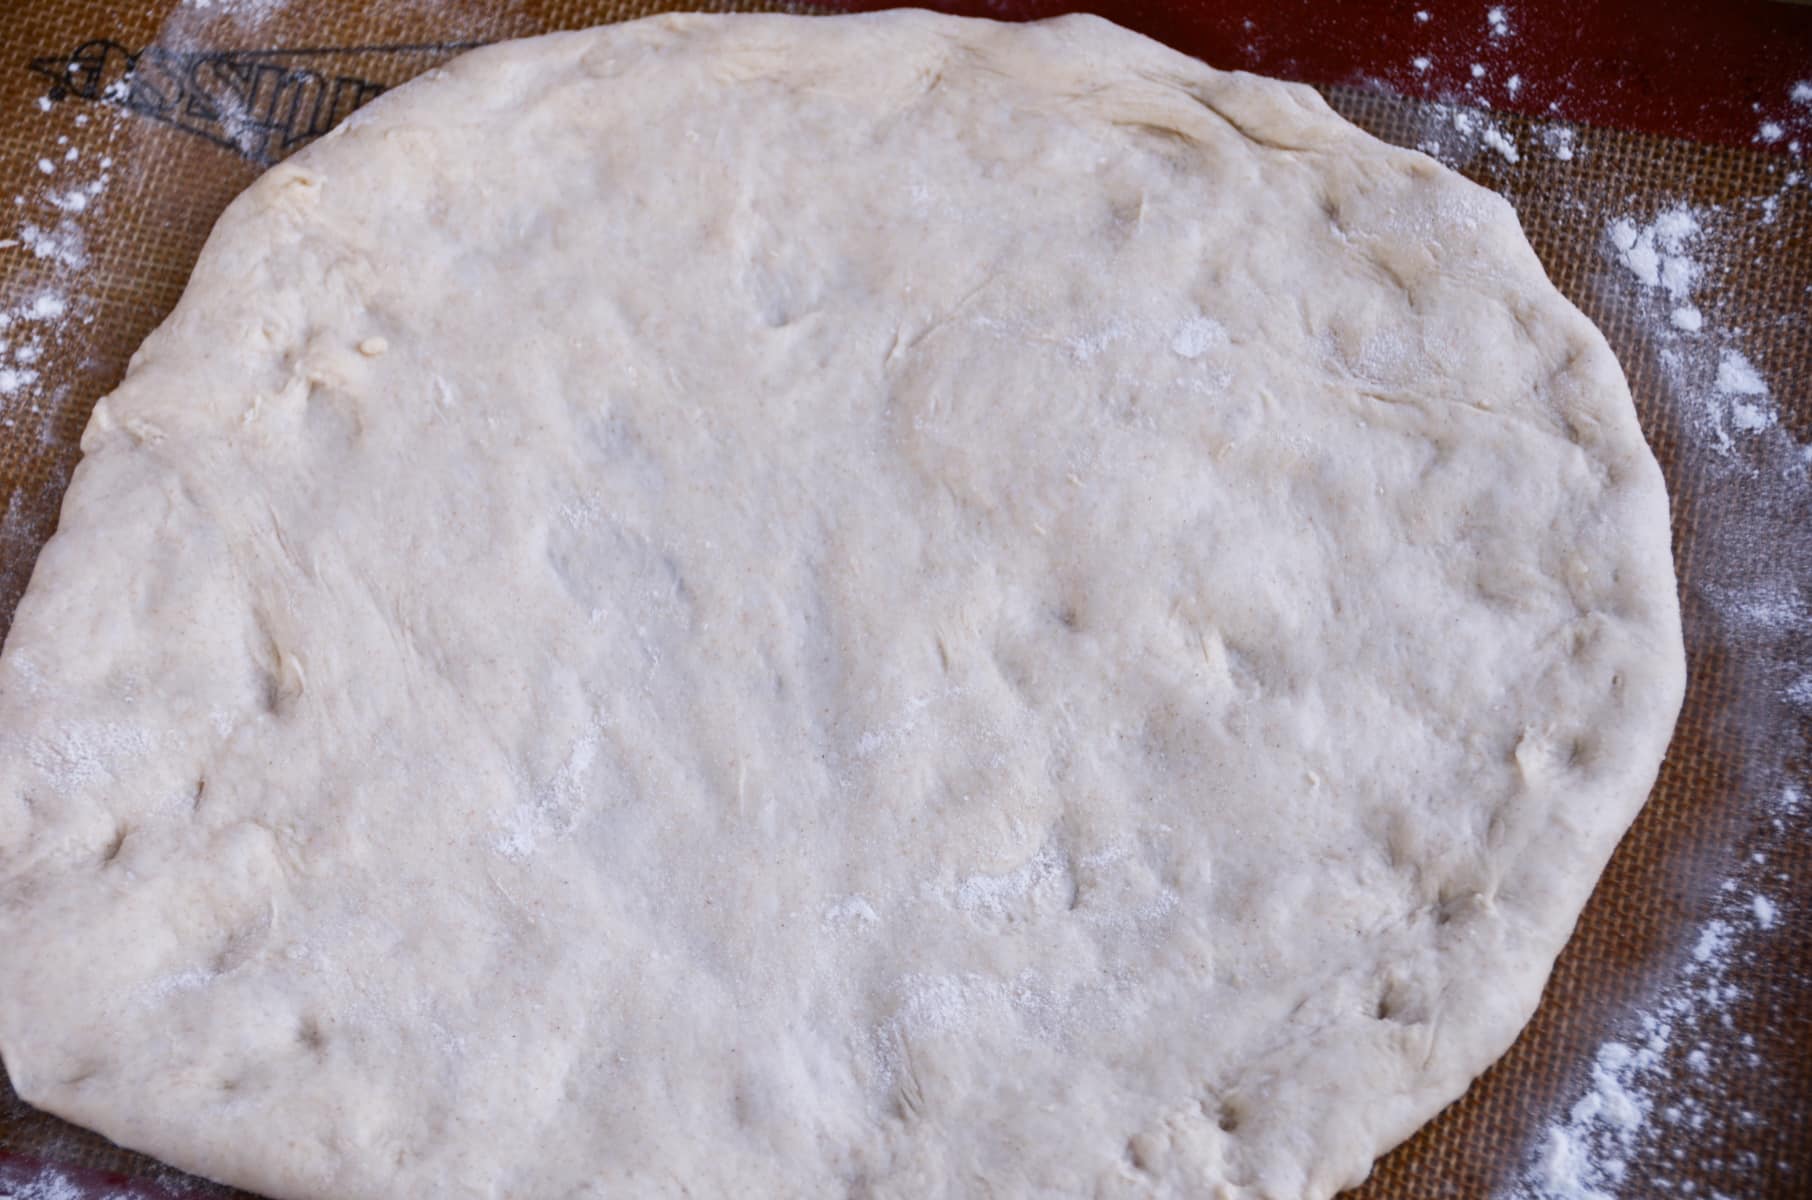 A dough rolled out and ready to top with potatoes.